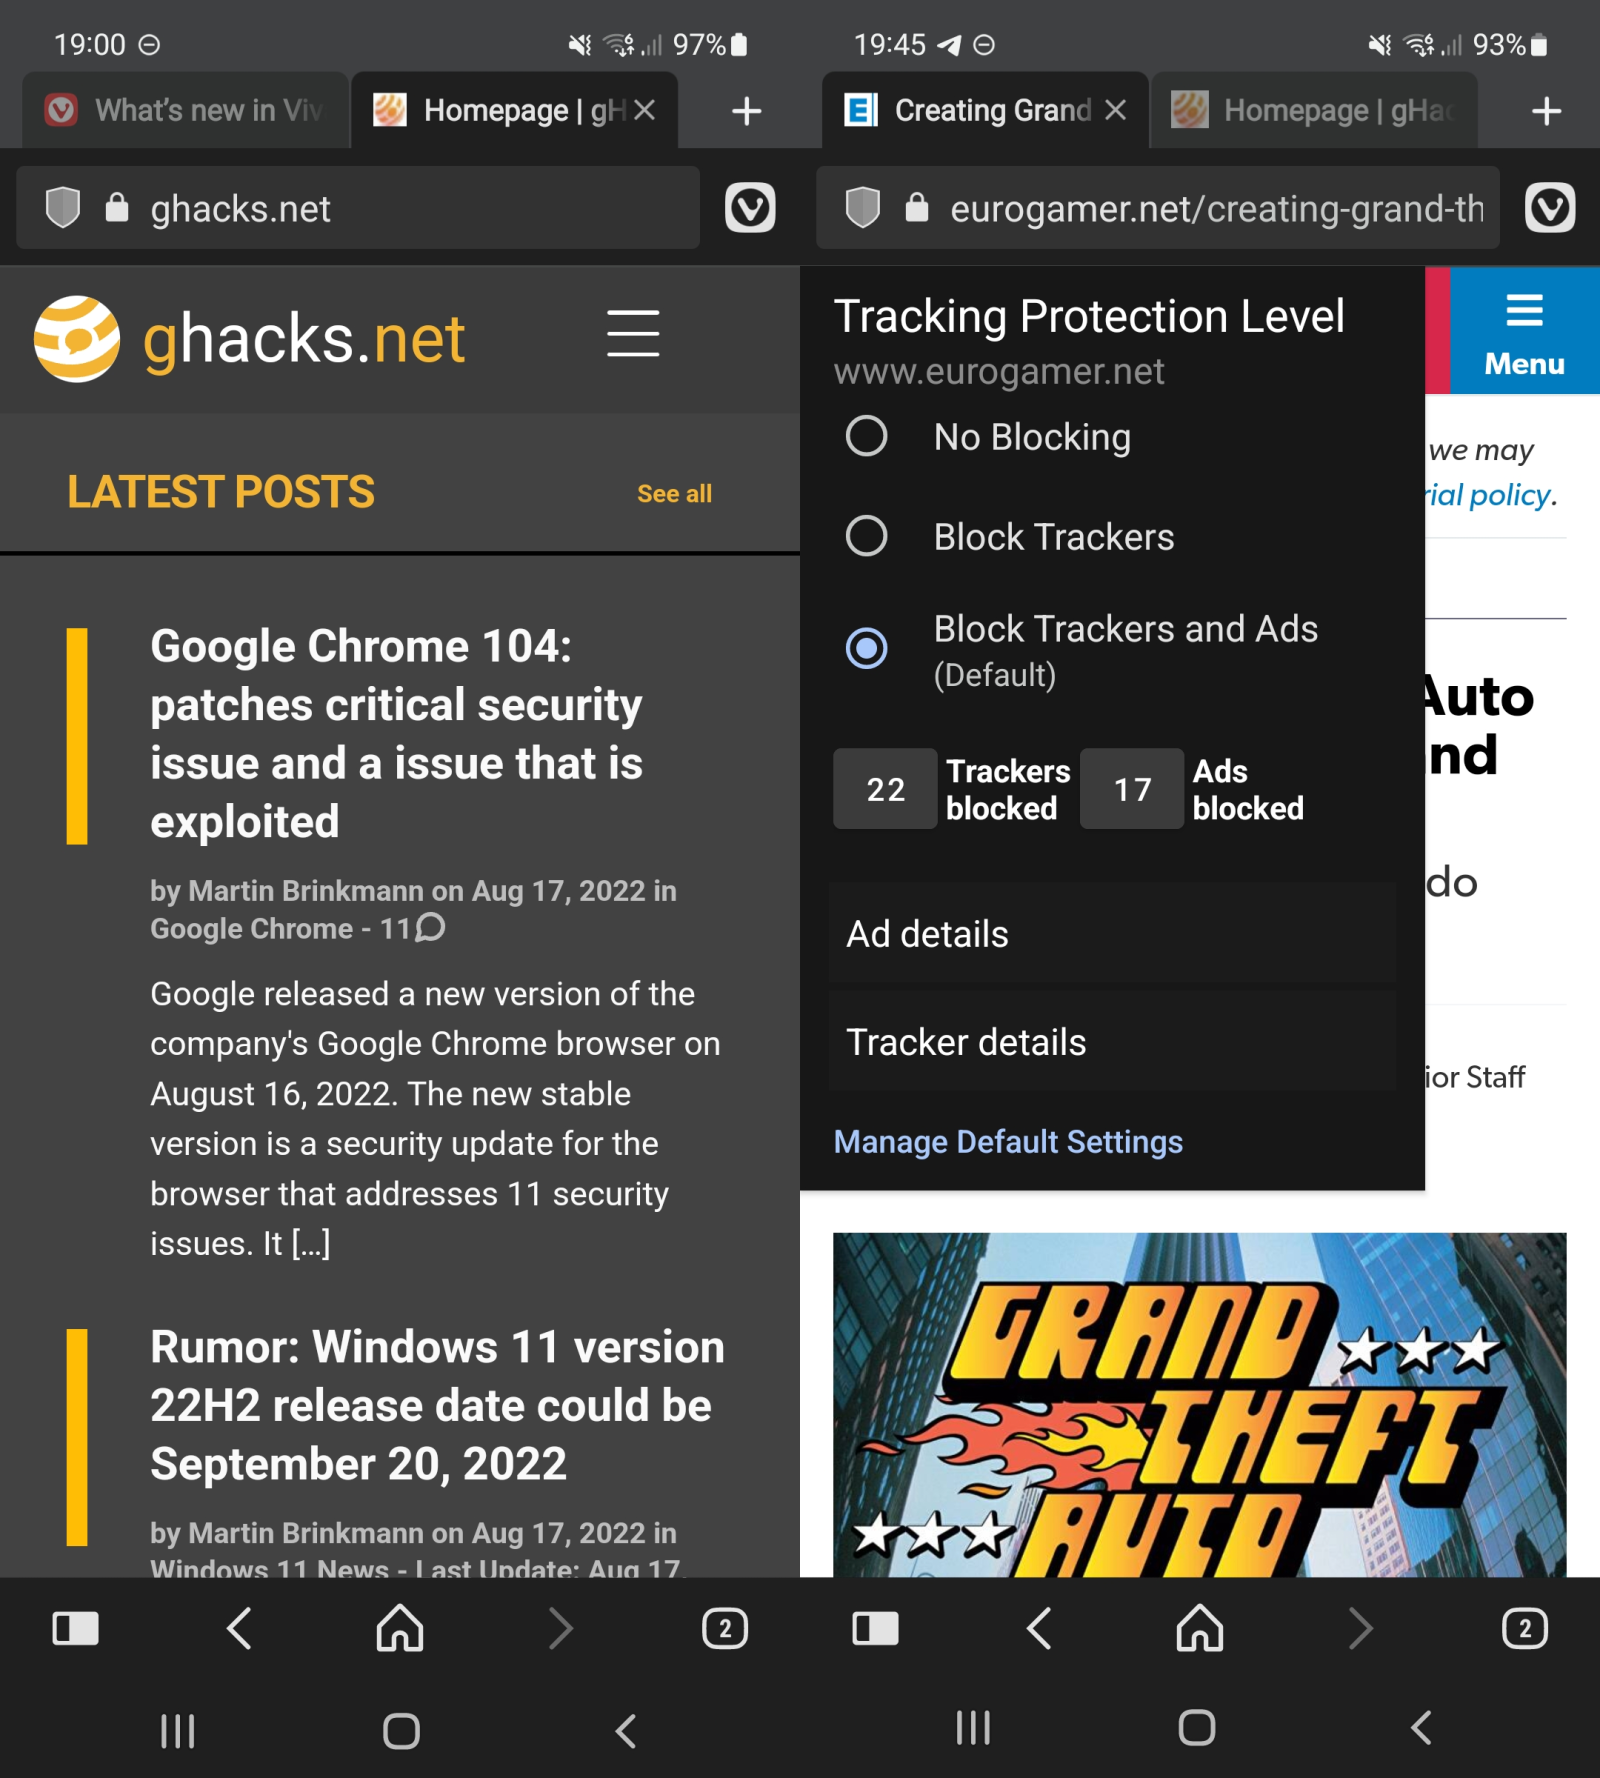 vivaldi 5.4 for android